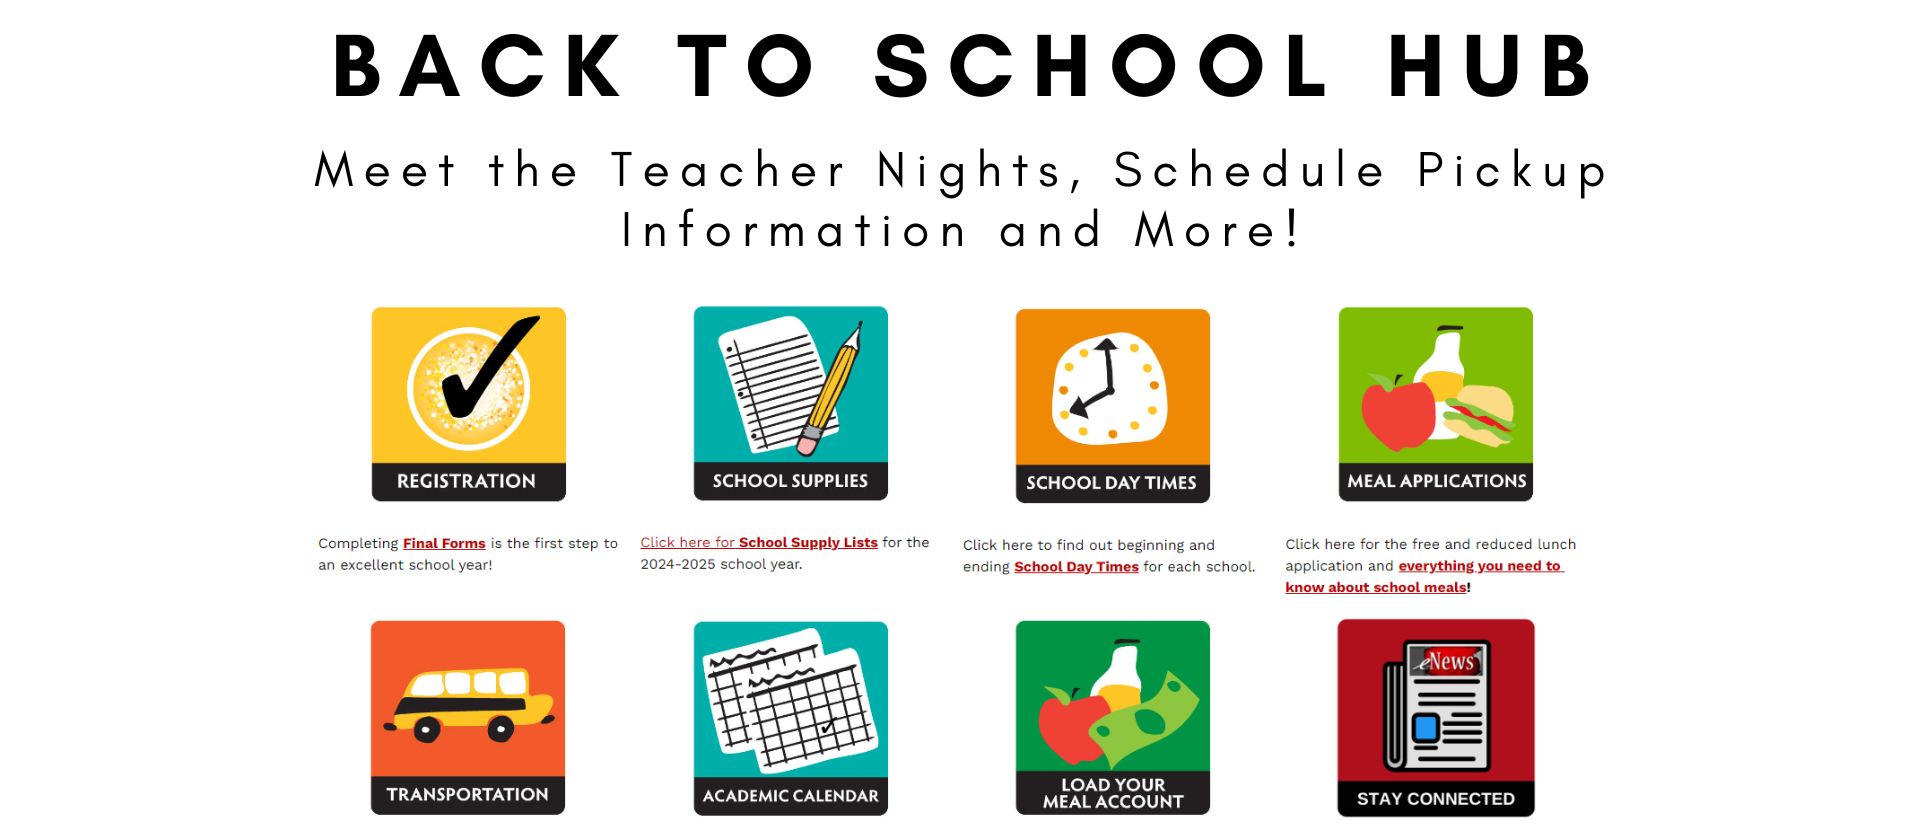 Back to School Hub graphic with small icons for registration, school supplies, school day times, etc.